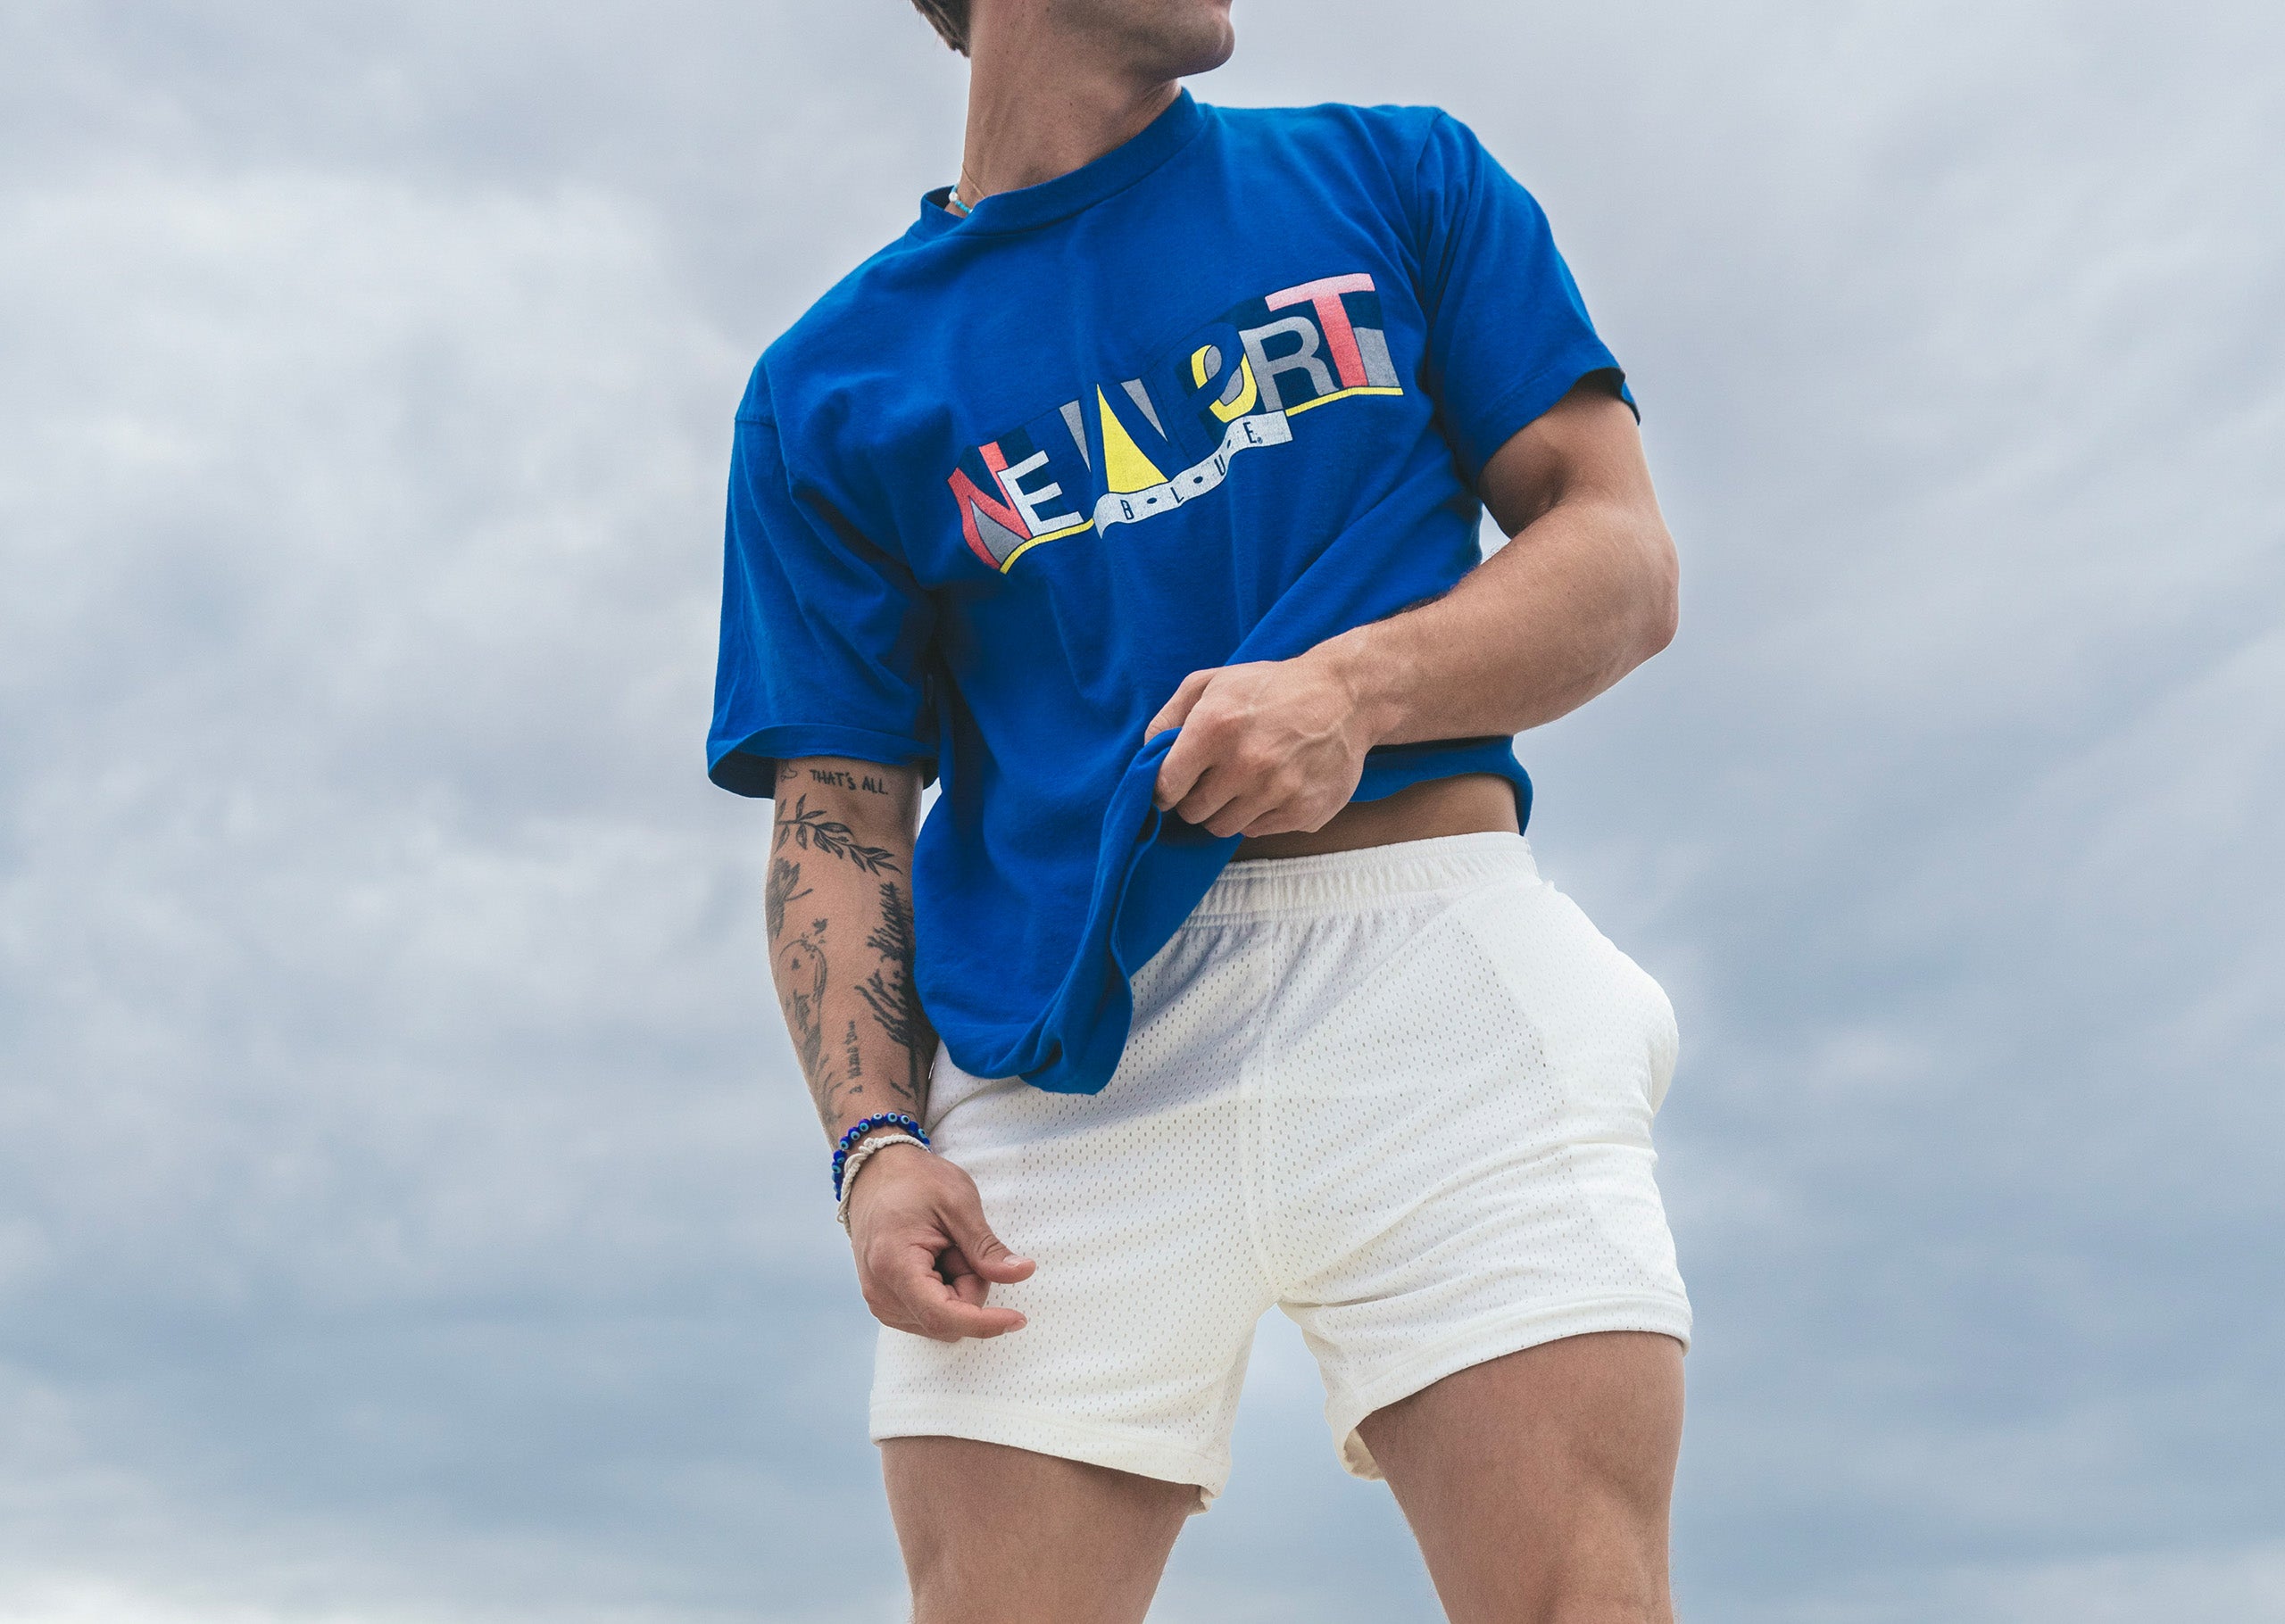 Man wearing blue shirt and cream colored lounge shorts with blue sky behind him.